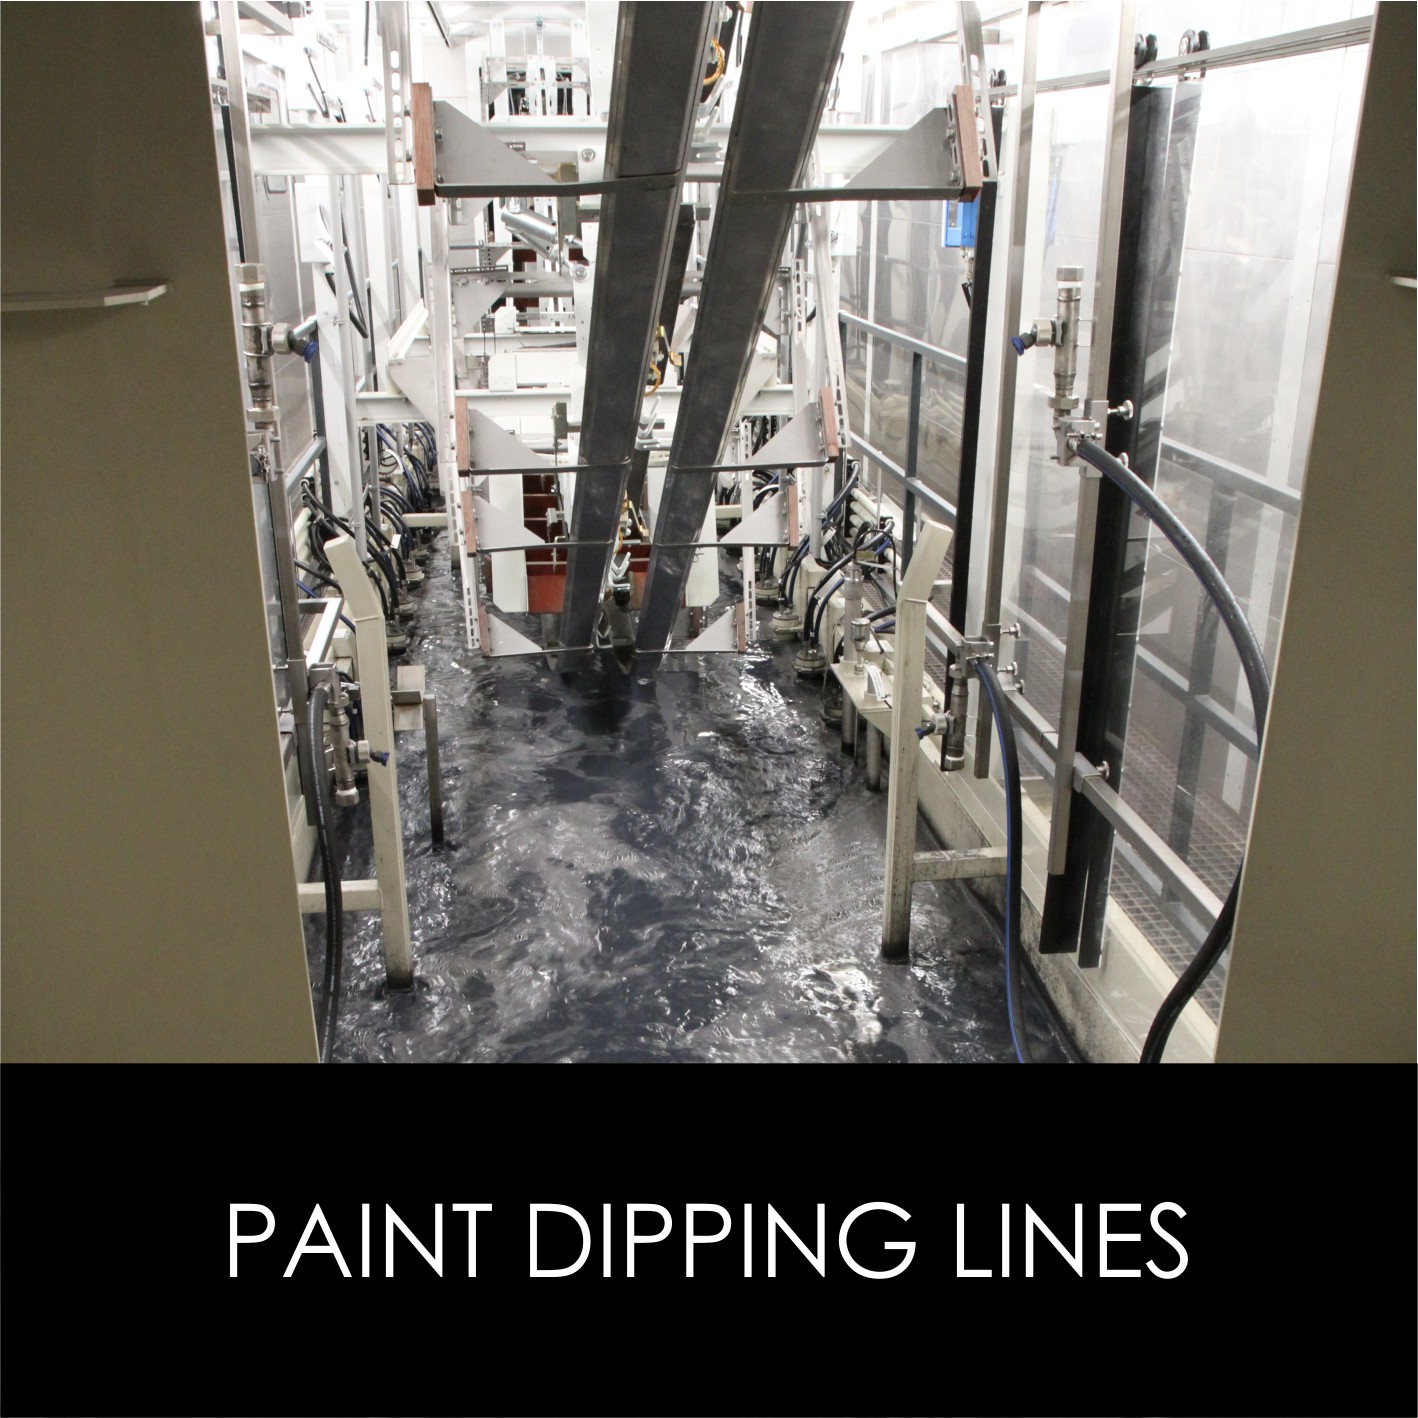 Paint dipping lines